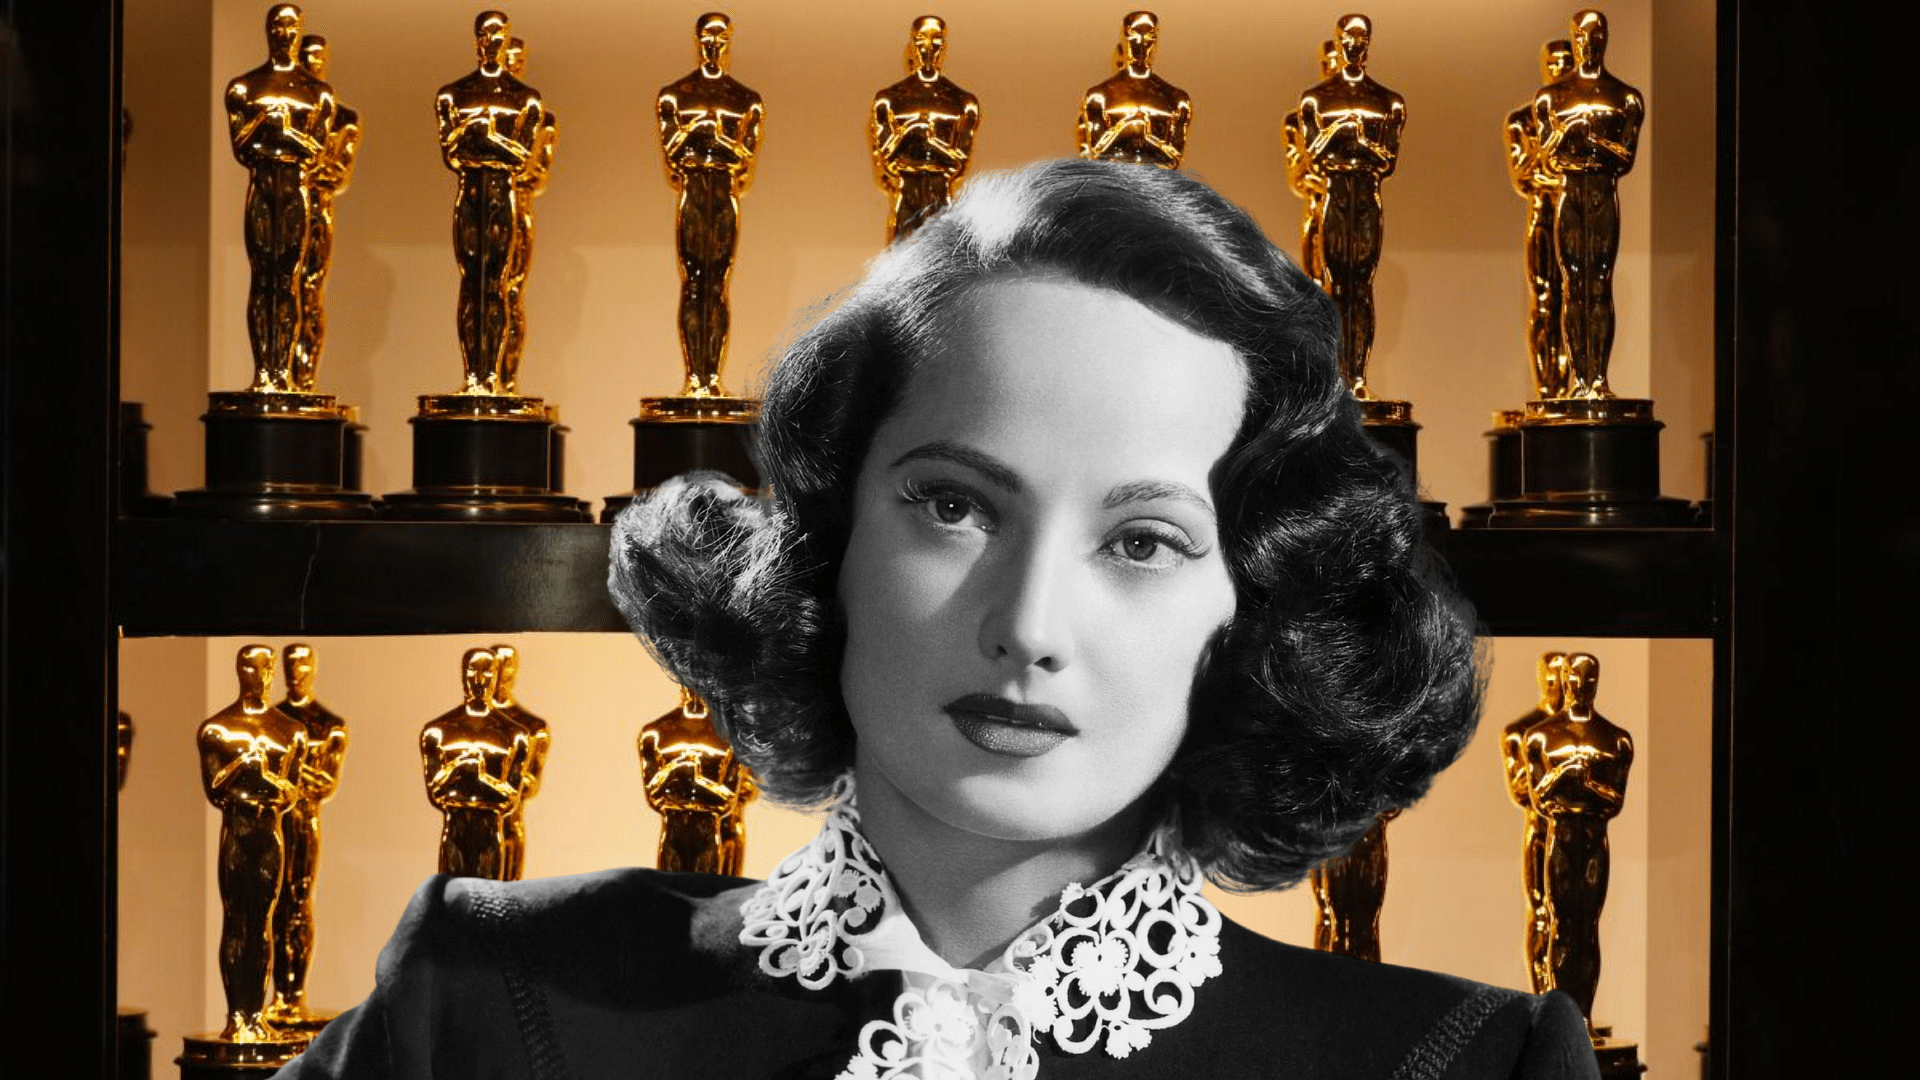 <div class="paragraphs"><p>Merle Oberon, a Hollywood star of the black and white era, was born in Bombay and was the <a href="https://www.thequint.com/us-nri-news/south-asian-diaspora-2022-remarkable-year-just-another-bout-tokenism-rishi-sunak-ms-marvel-oscars-grammy">first woman of Asian descent</a> to be nominated for Best Actress at the Academy Awards in 1935.</p></div>